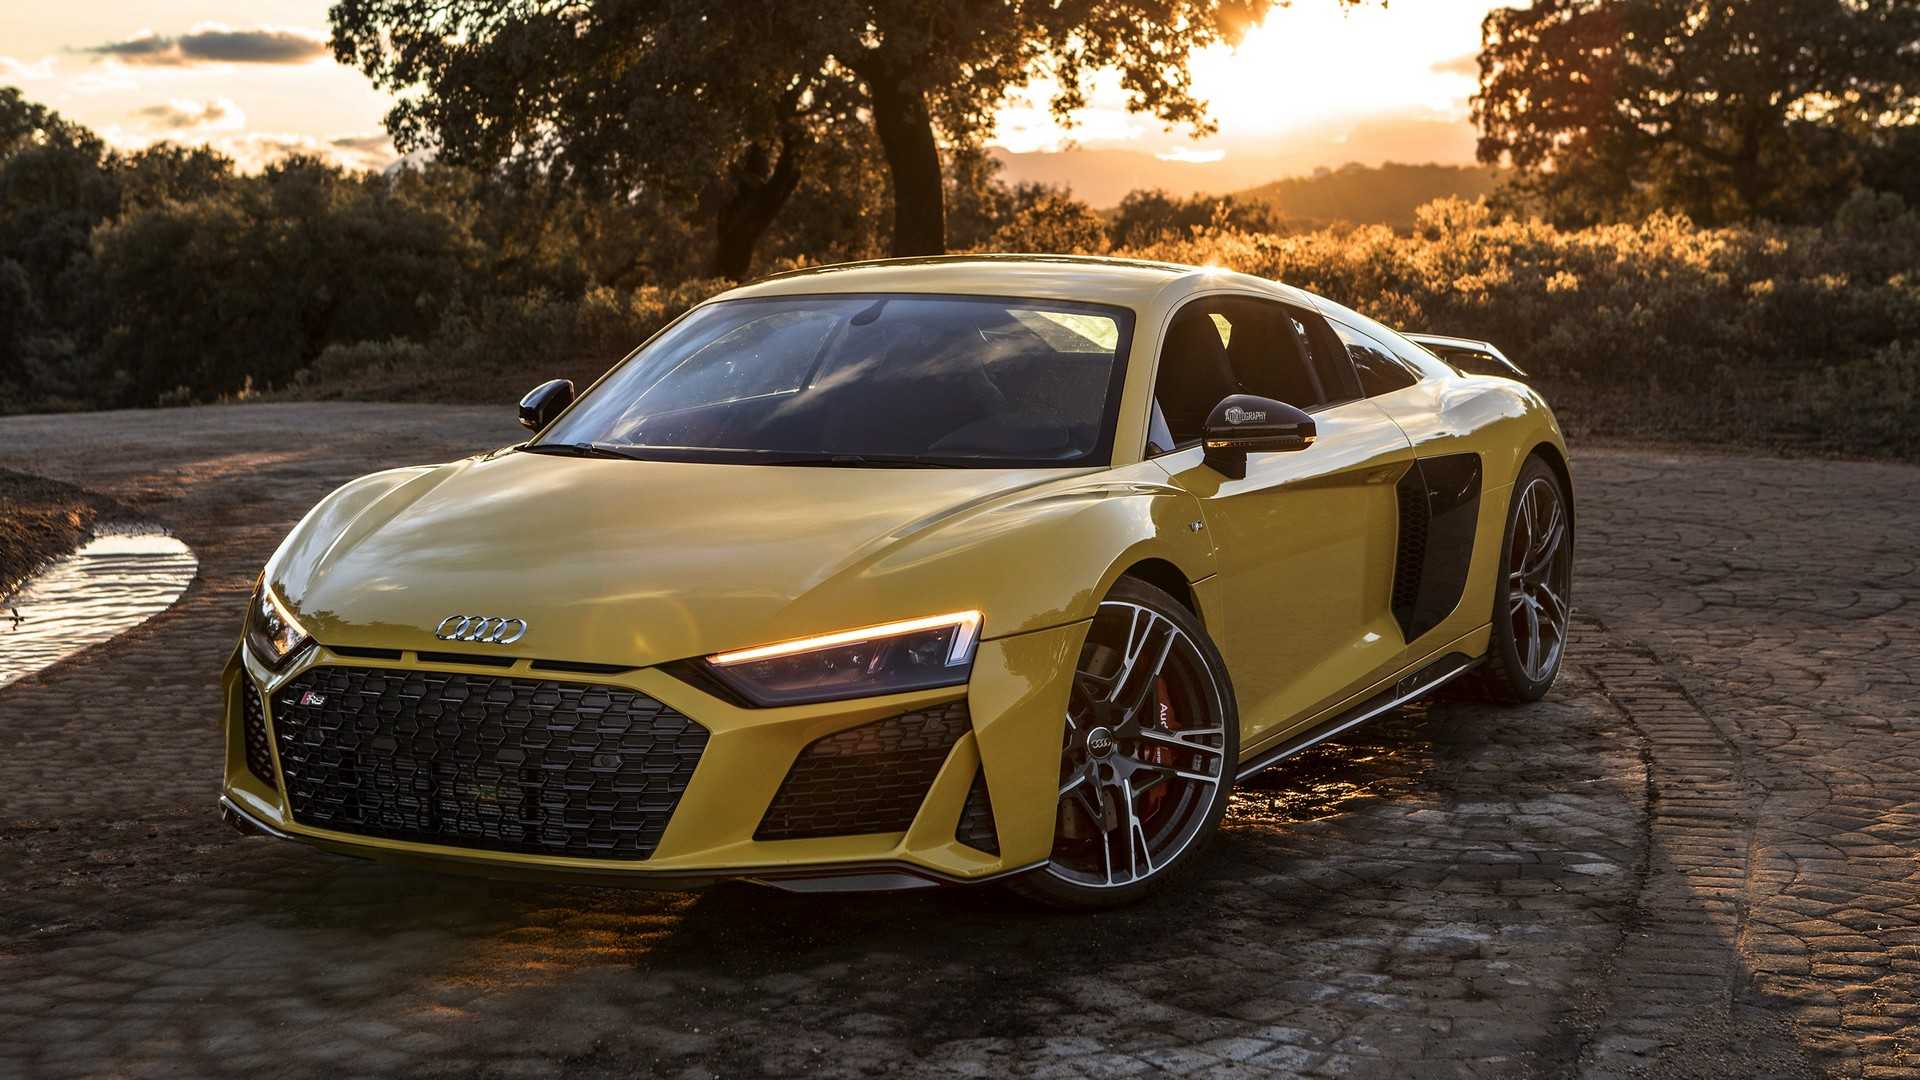 Audi R V Performance Looks Brutal in Yellow